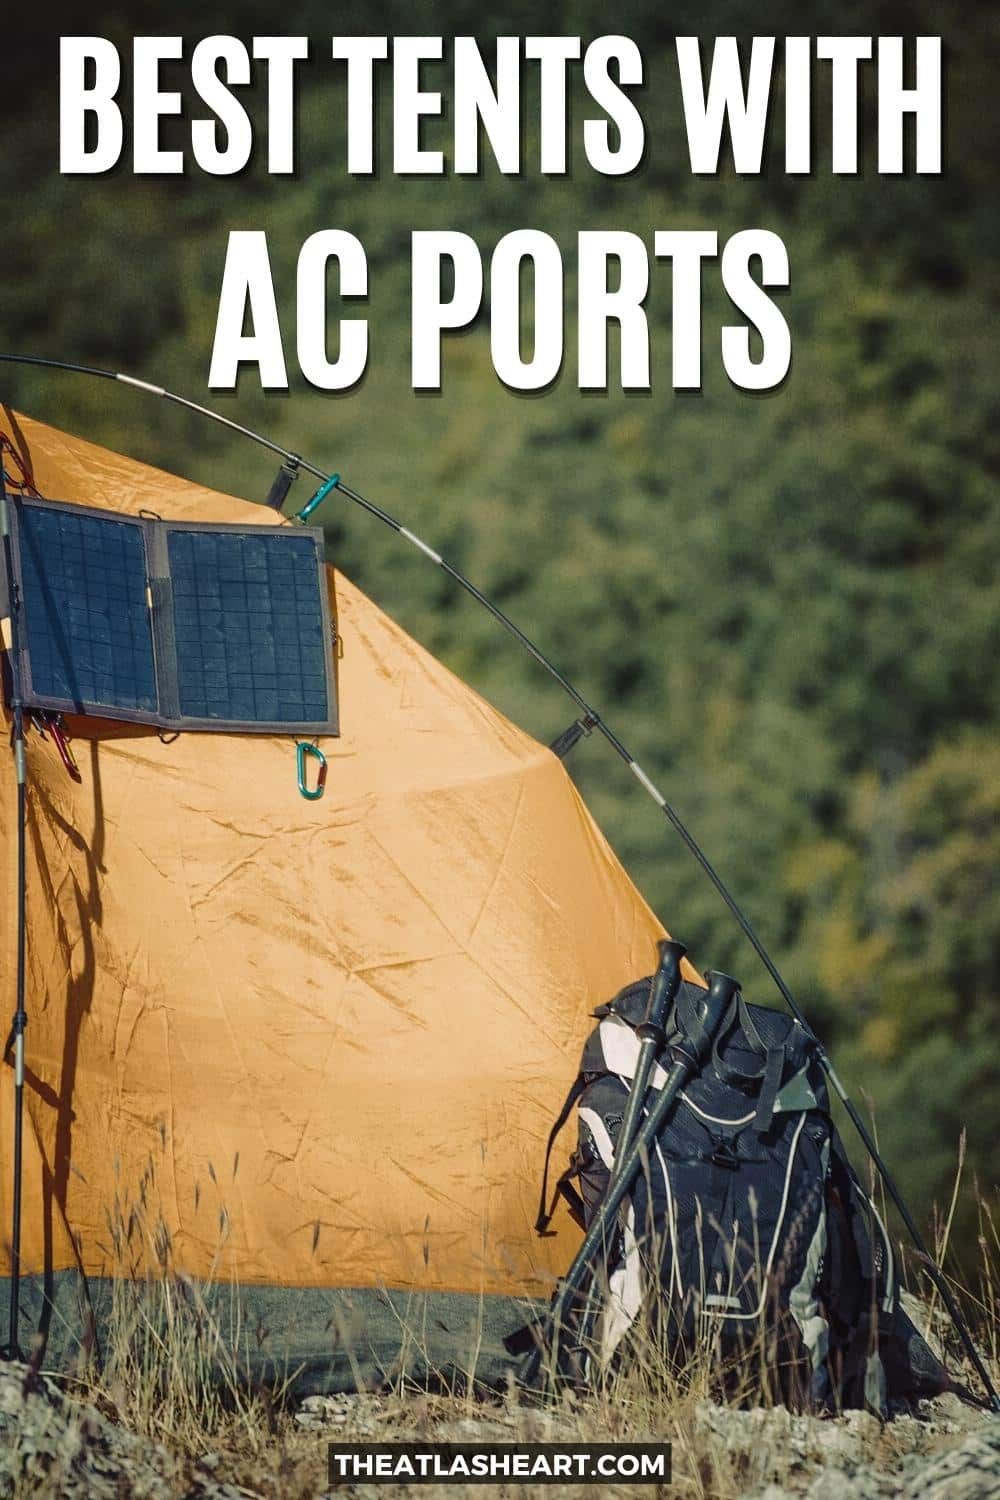 11 Best Tents With AC Ports [Top Air Conditioned Tents for Camping]